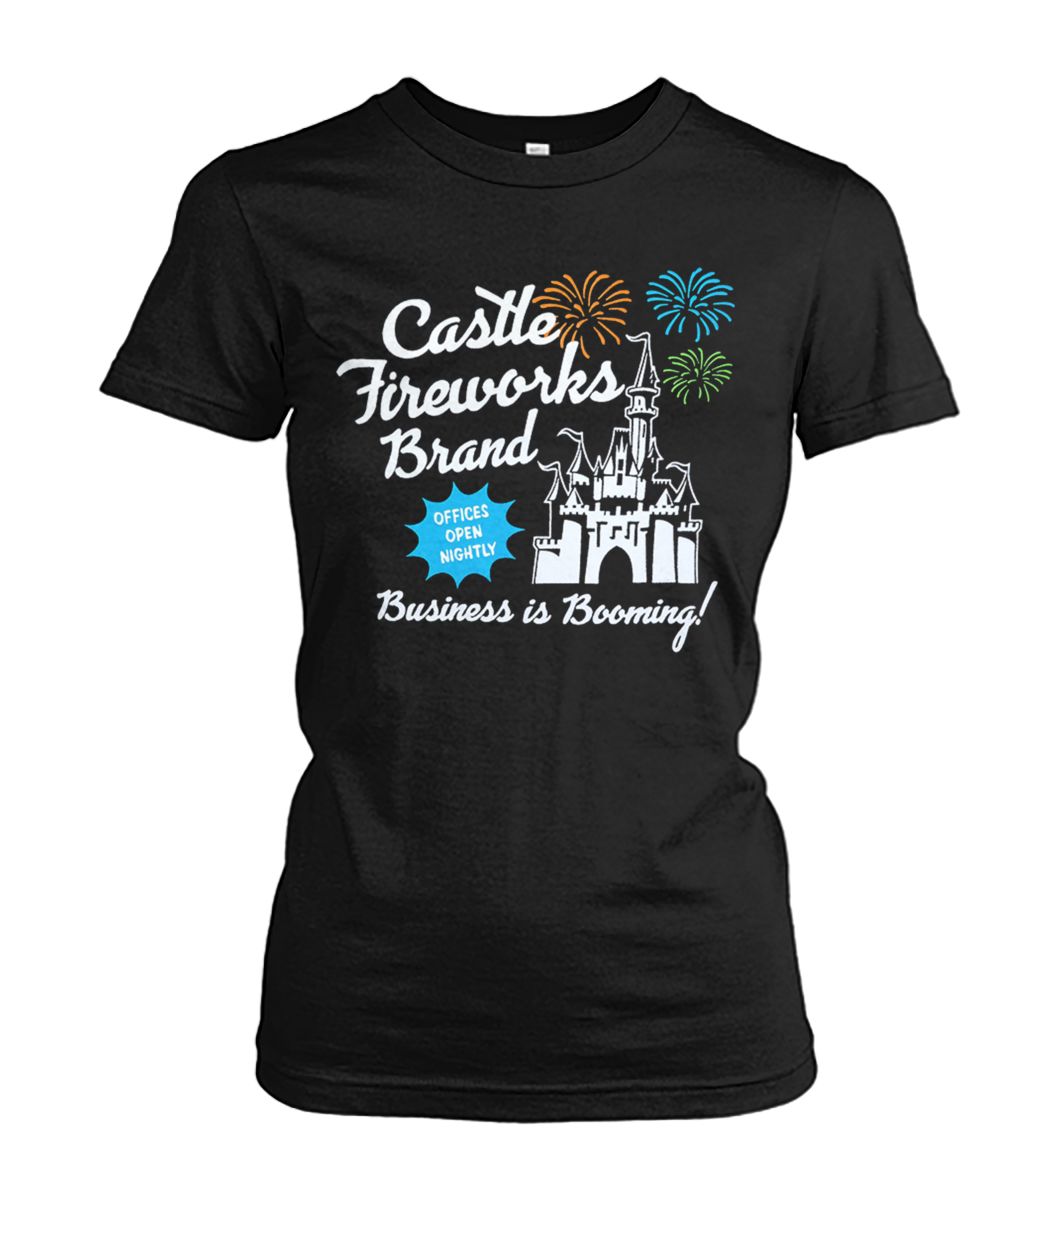 Fantasyland castle fireworks brand business is booming women's crew tee